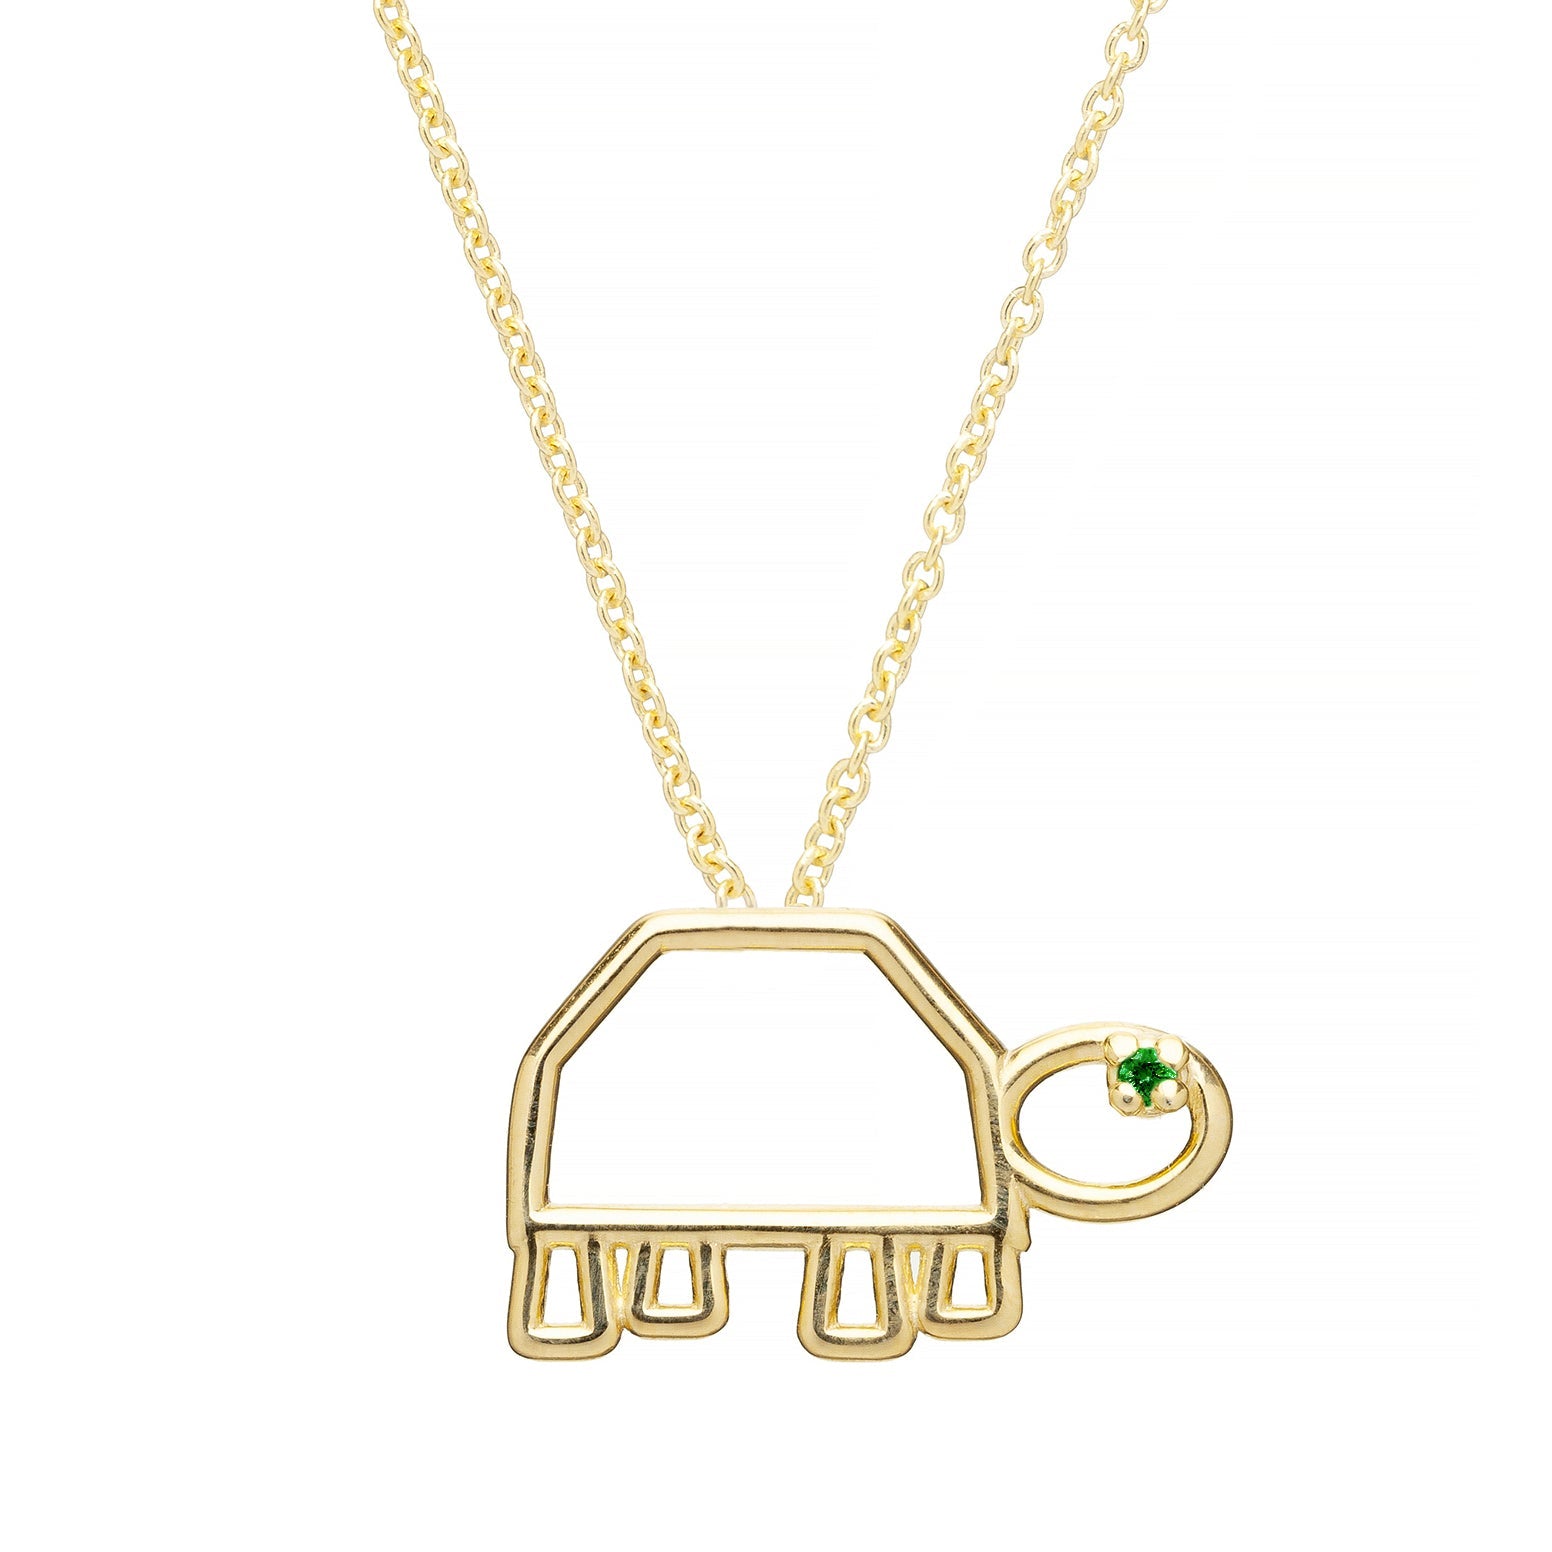 Gold chain necklace with a turtle shaped pendant with an emerald eye